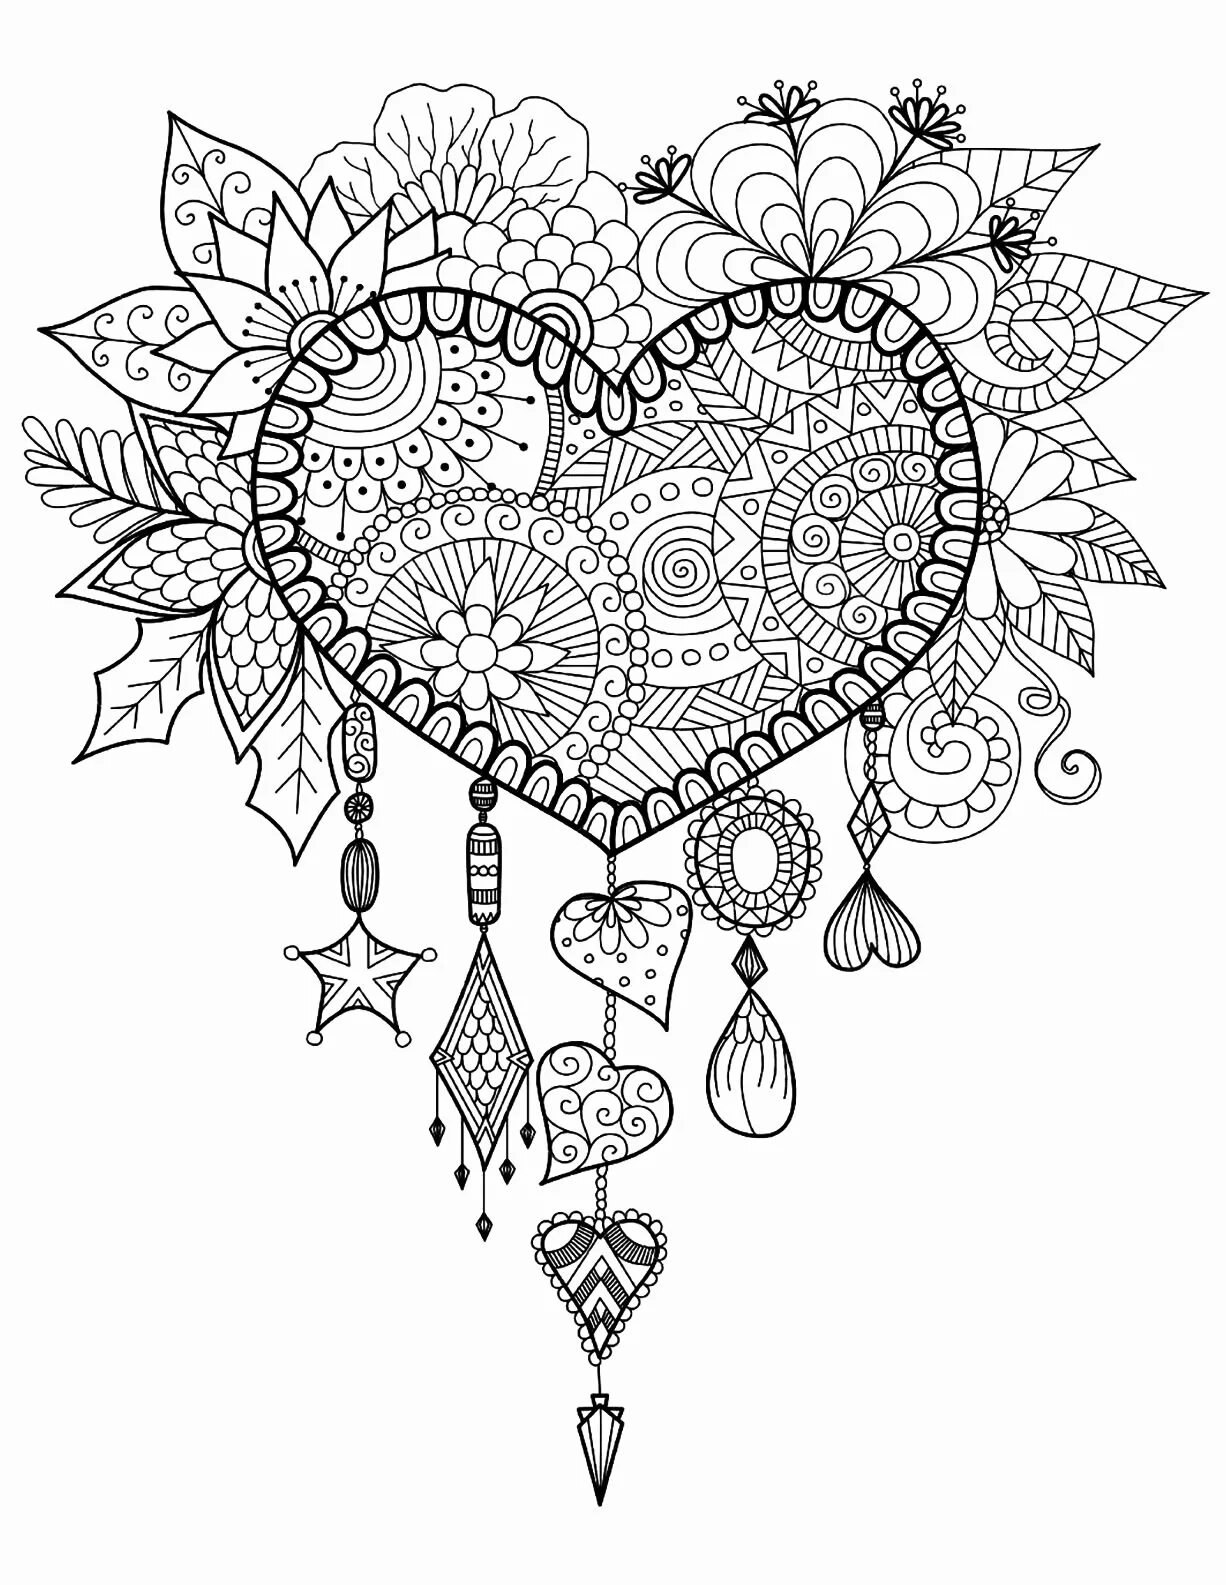 Tranquil simple pencil antistress coloring